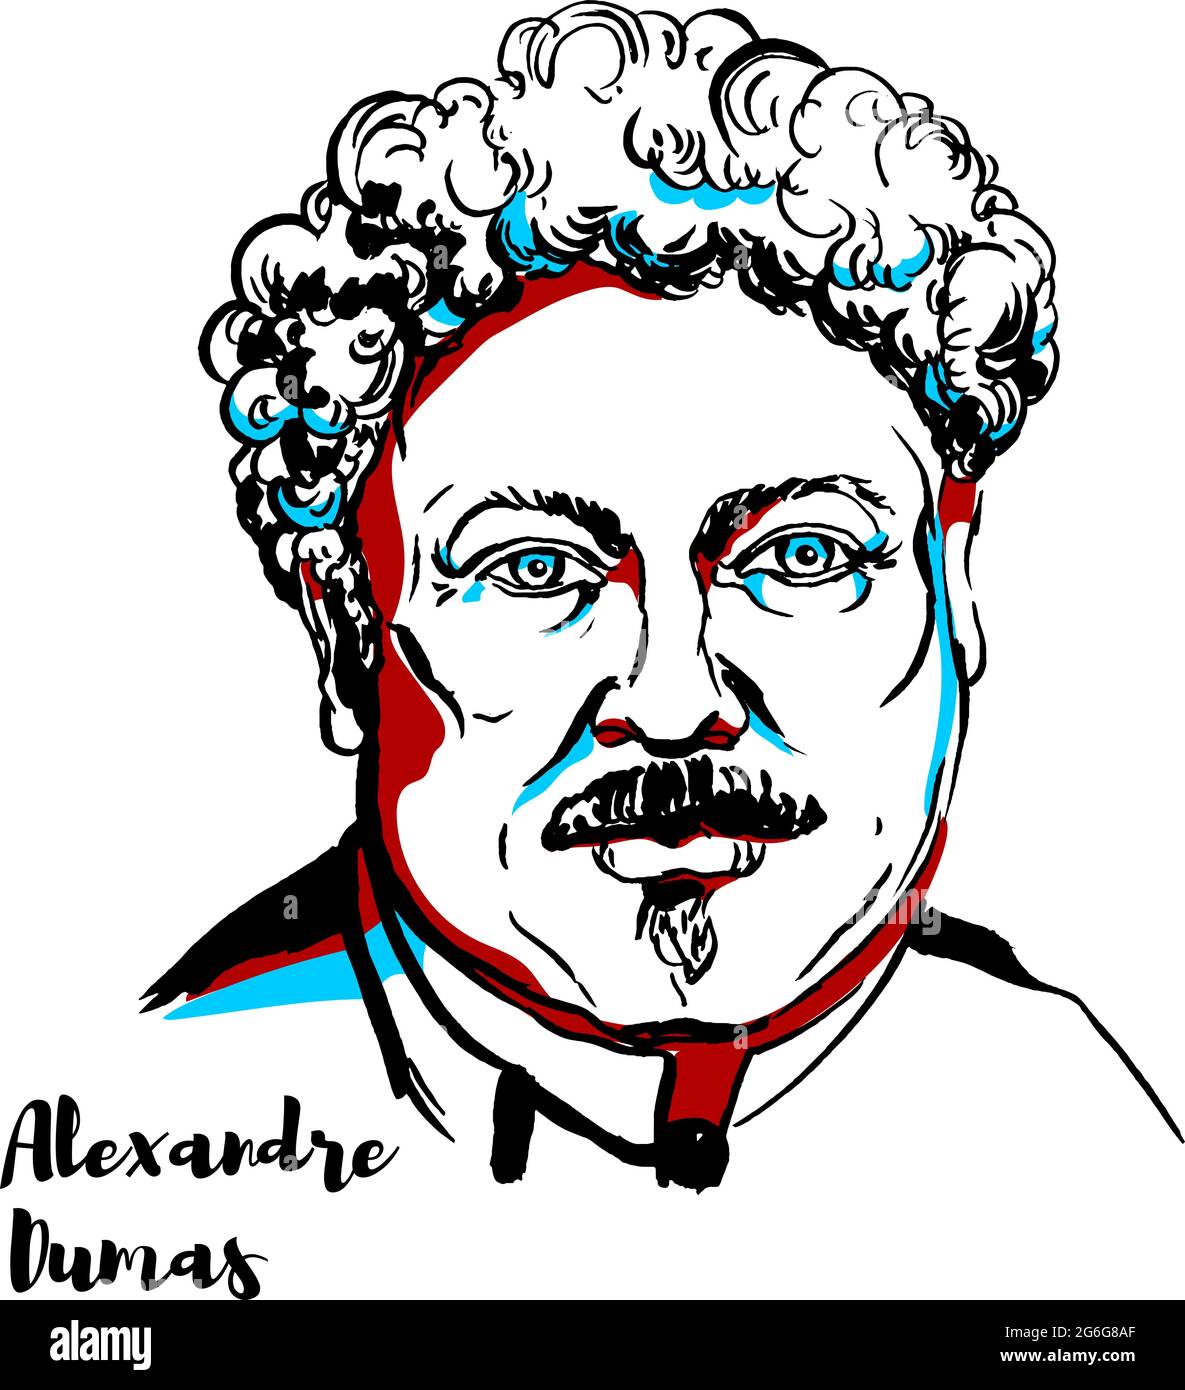 Alexandre Dumas engraved vector portrait with ink contours. Famous french writer, author of The Count of Monte Cristo & The Three Musketeers. Stock Vector